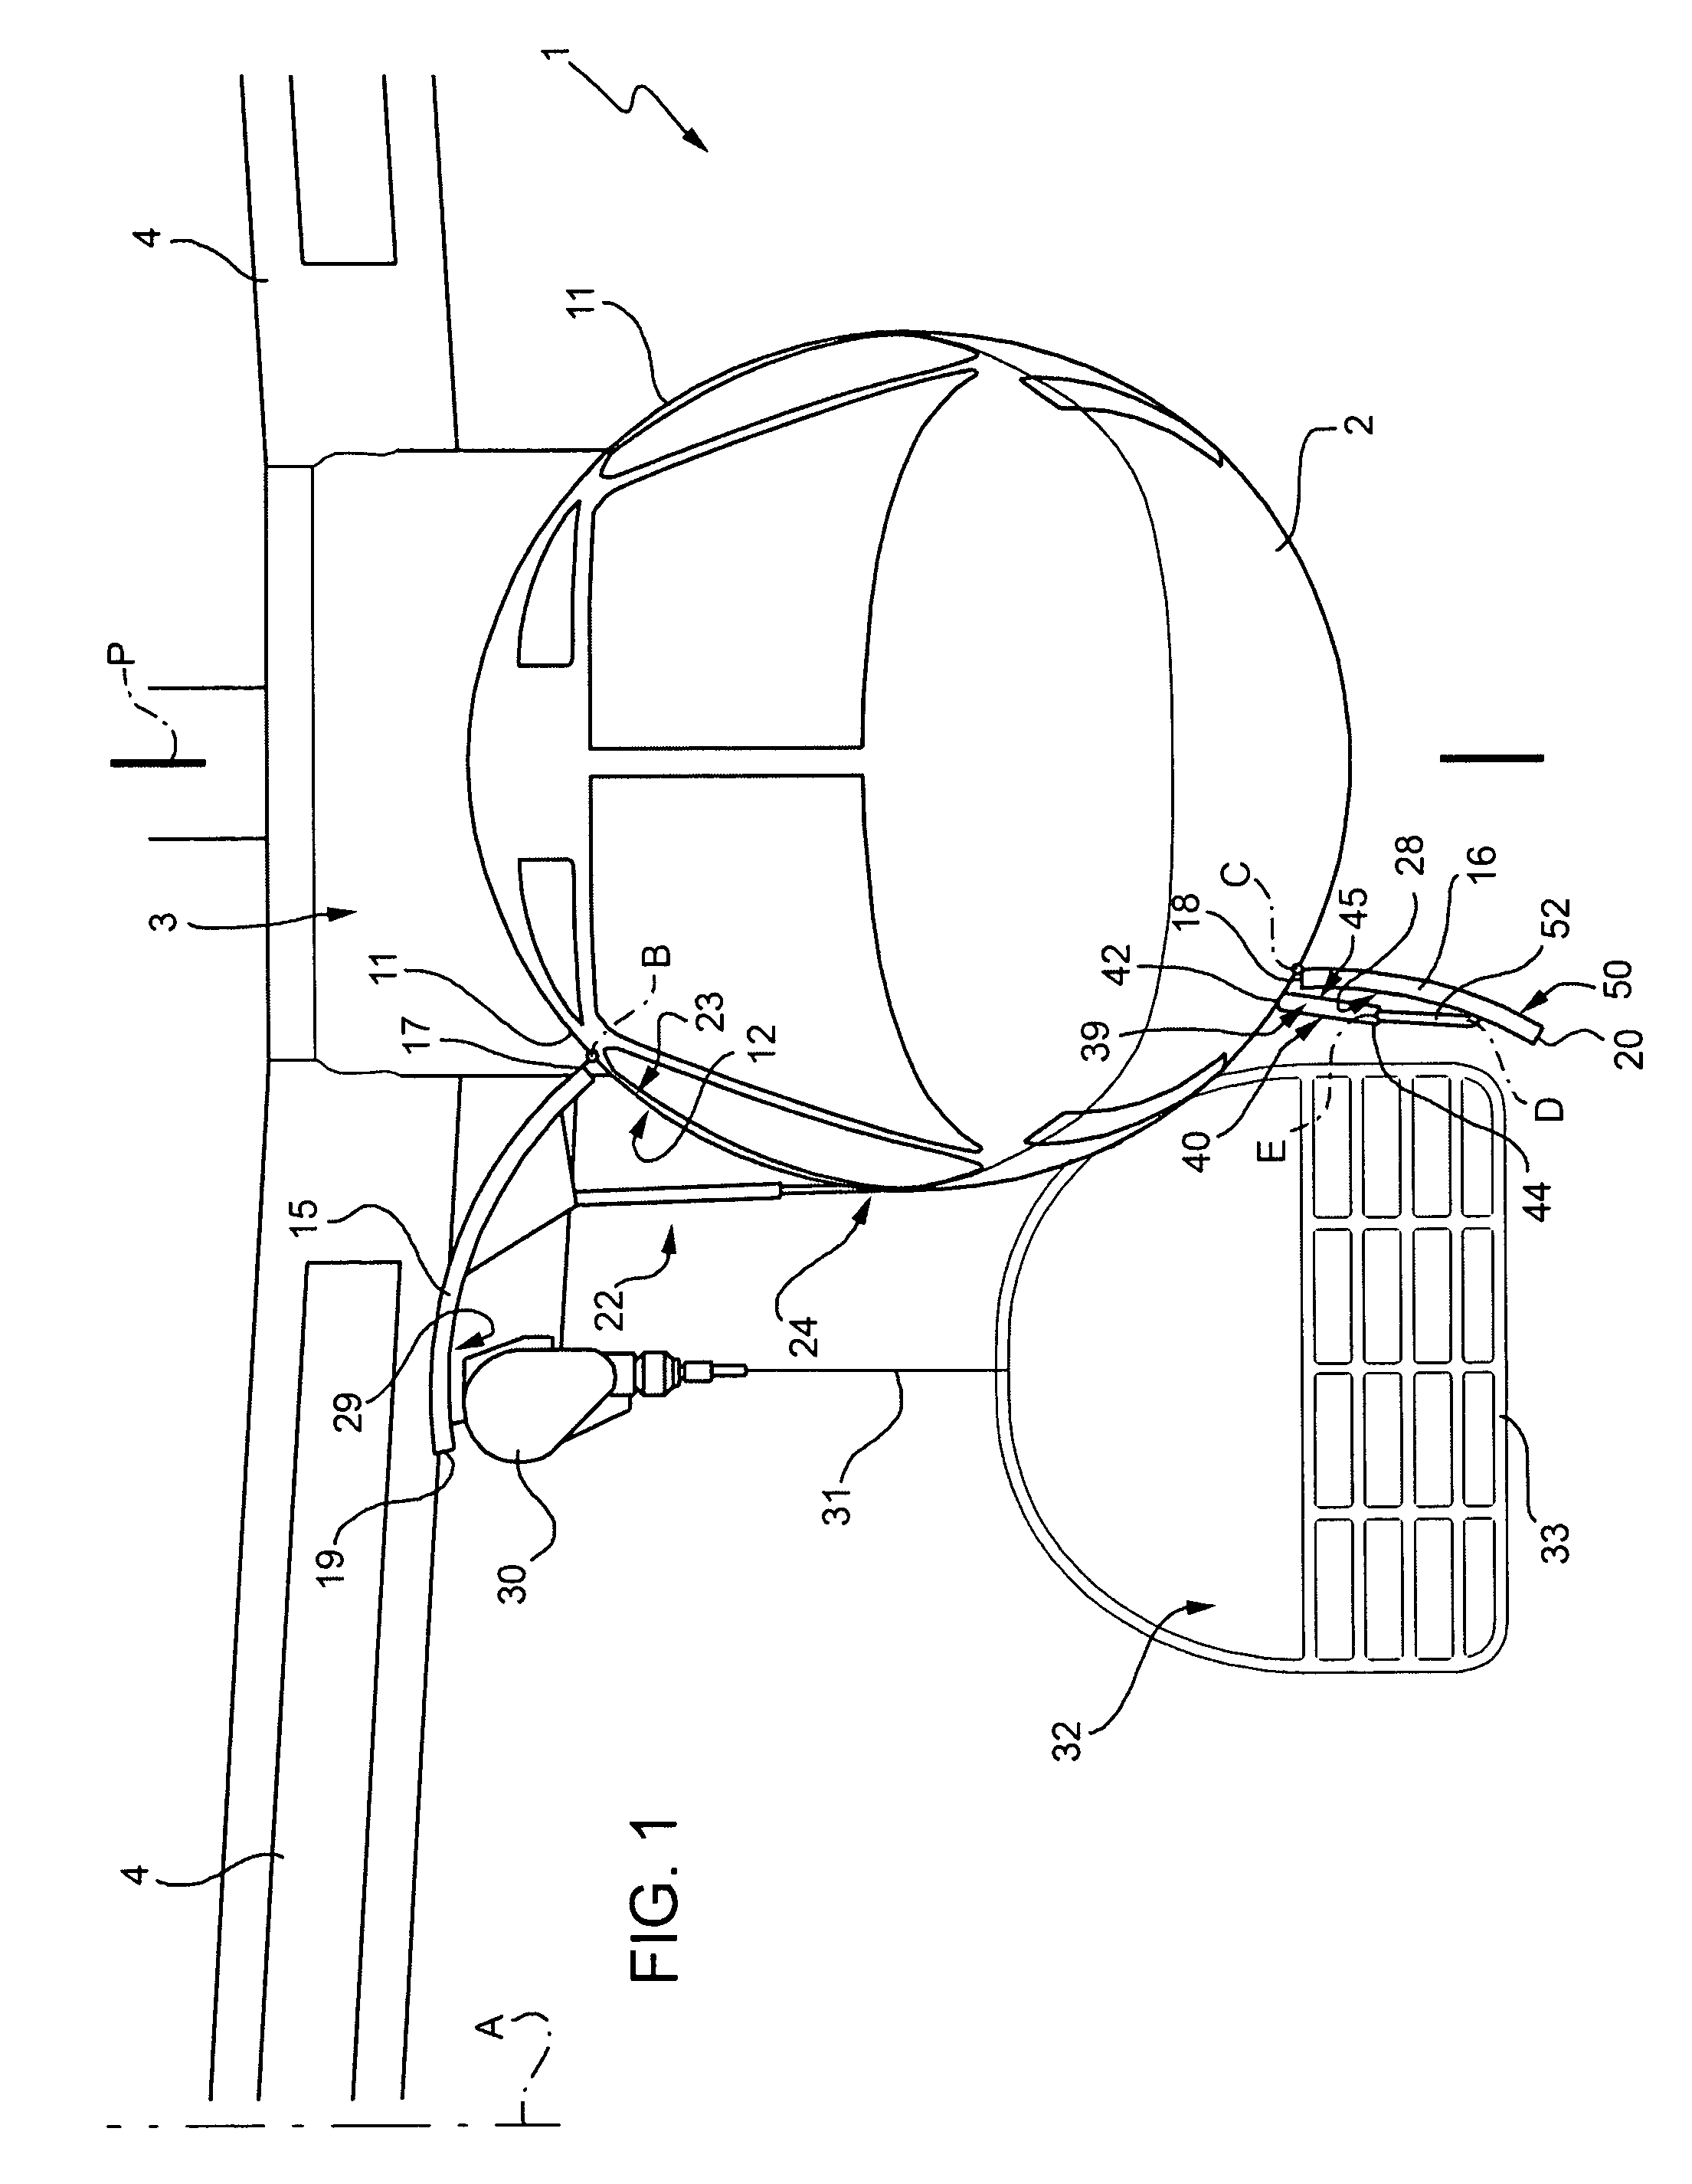 Aircraft and method of retrieving a rescue cradle into the aircraft fuselage